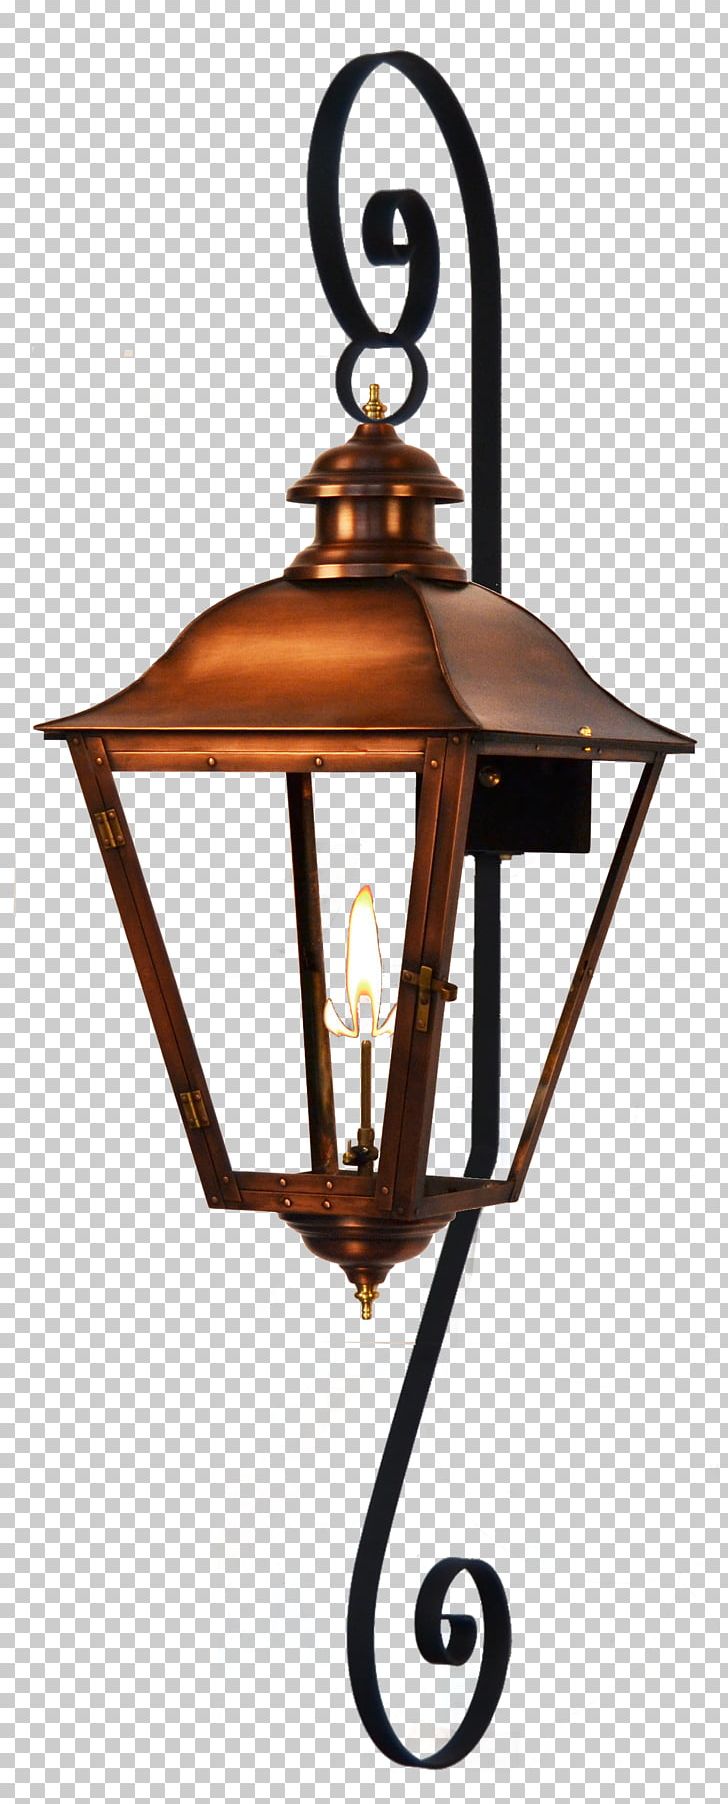 Gas Lighting Lantern Light Fixture PNG, Clipart, Ceiling, Ceiling Fixture, Coppersmith, Electricity, Flame Free PNG Download